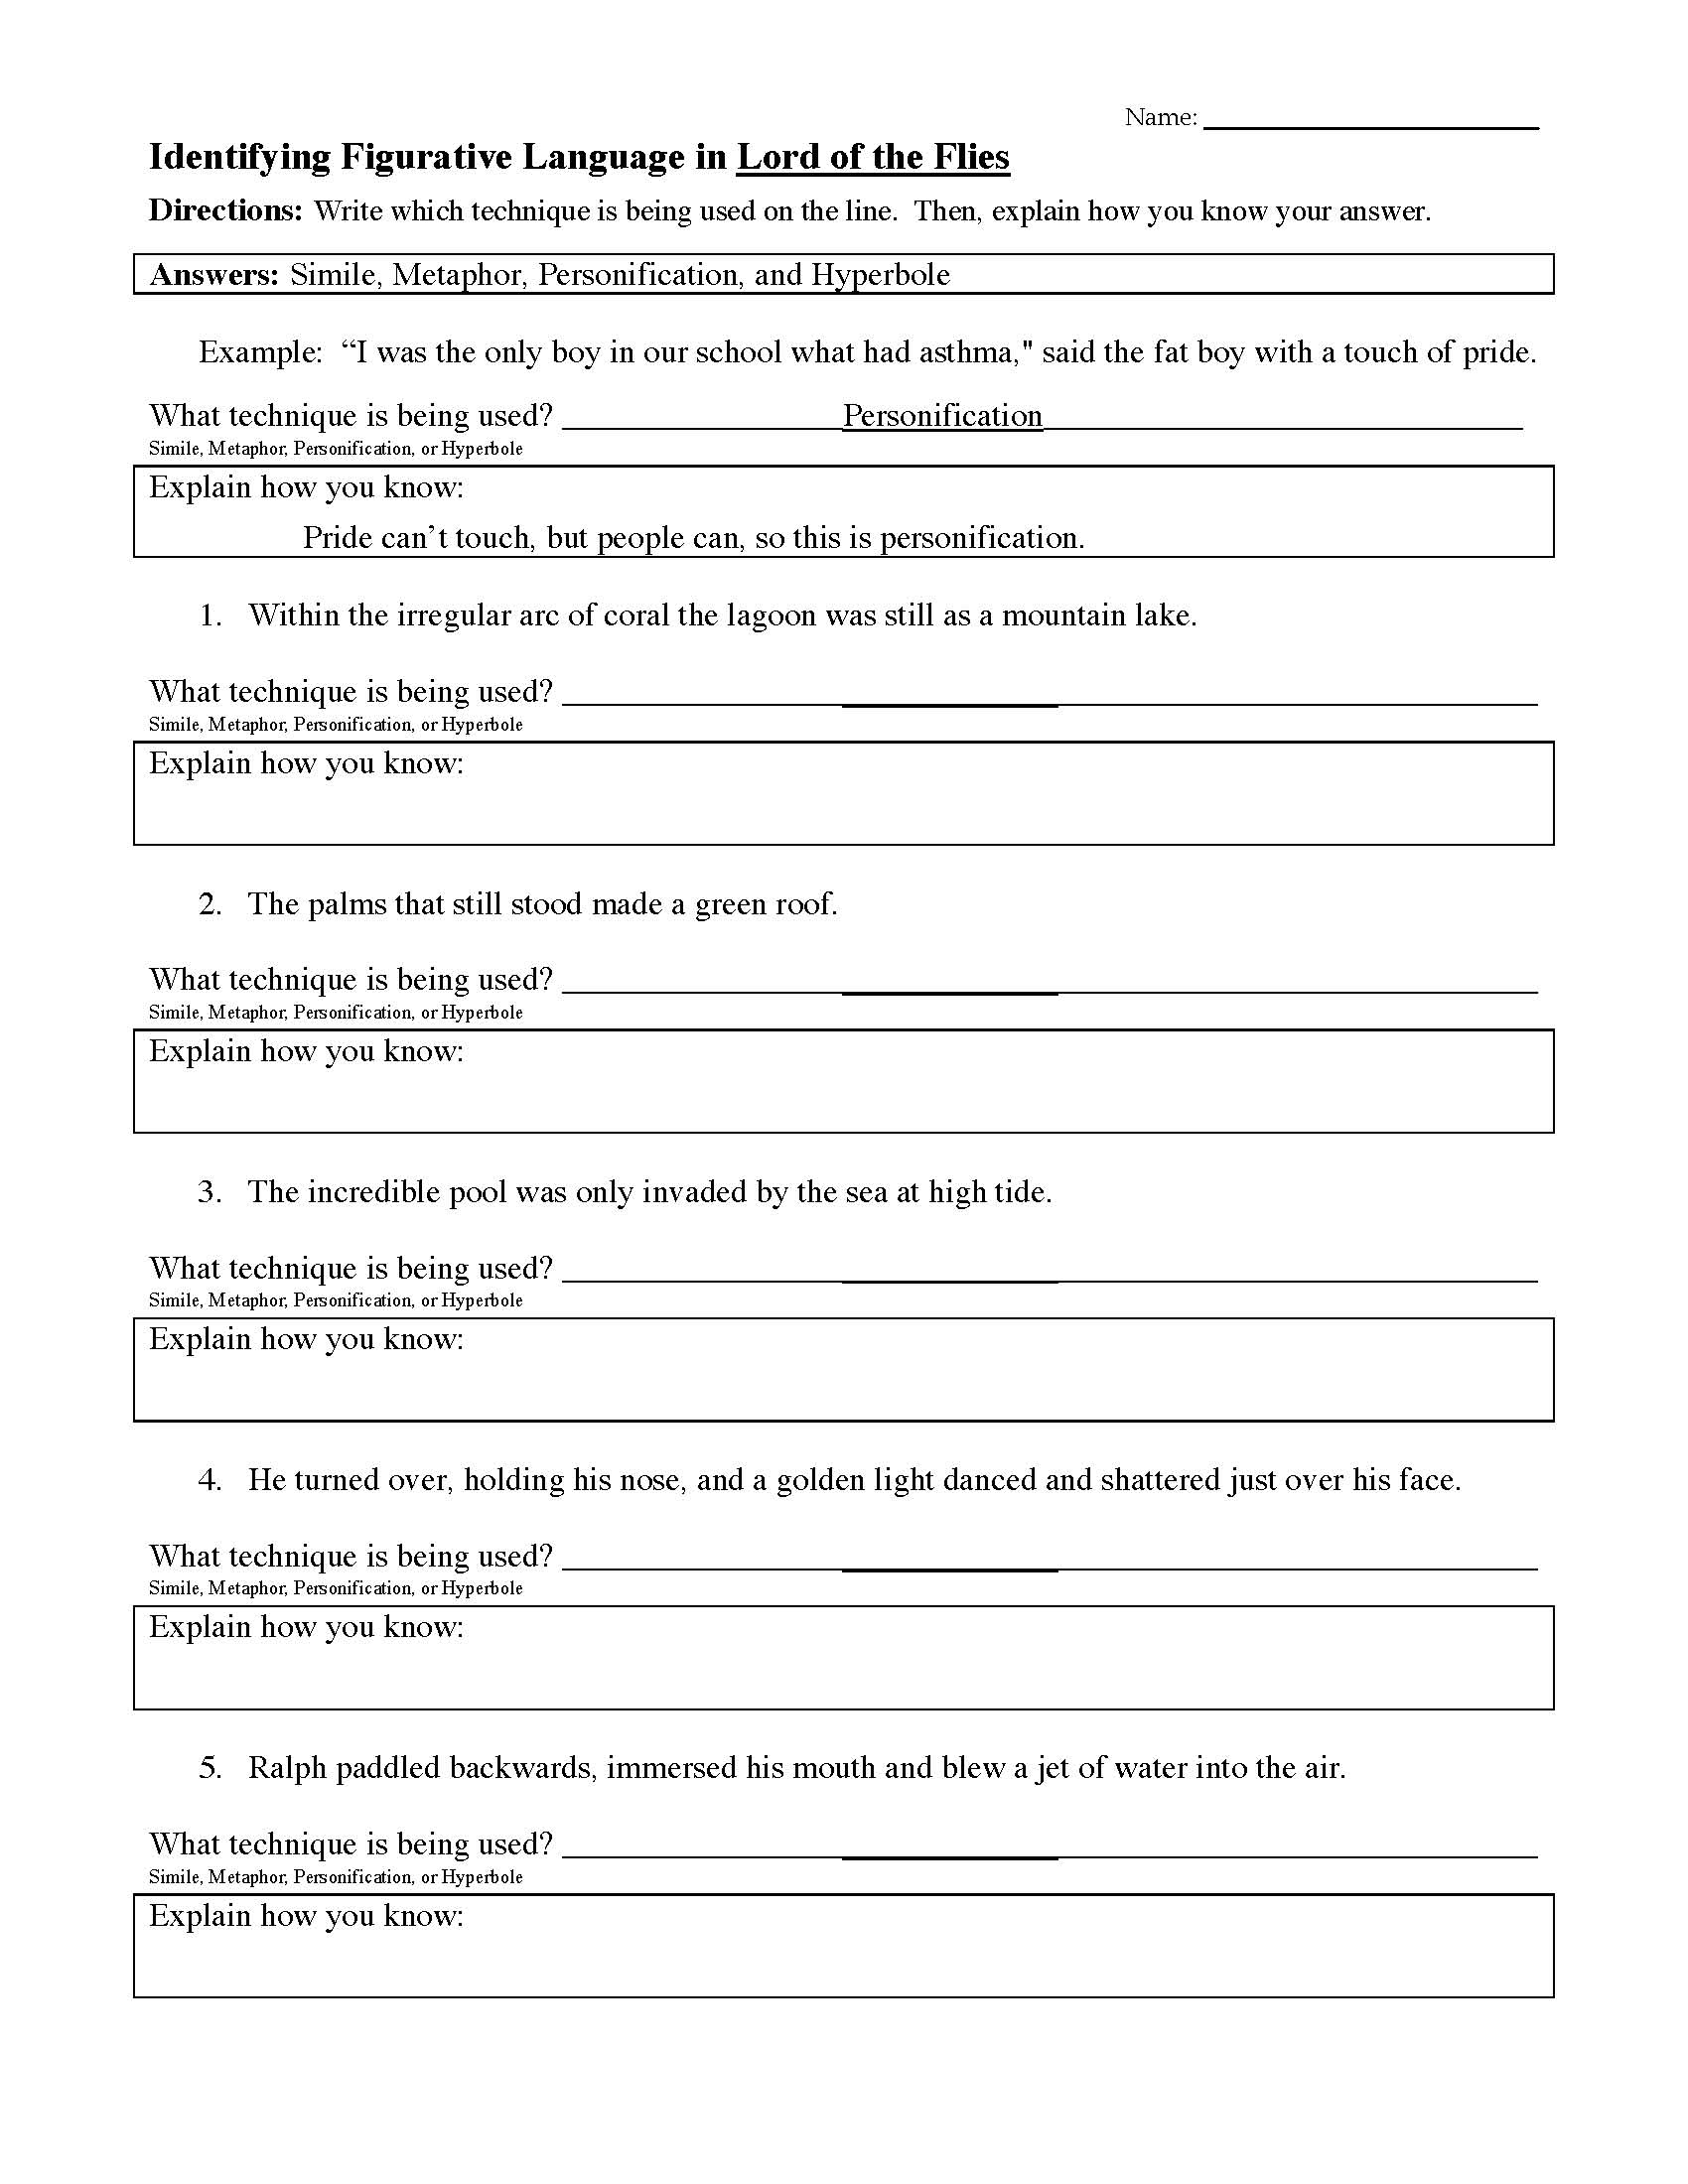 Literal And Figurative Language Worksheets